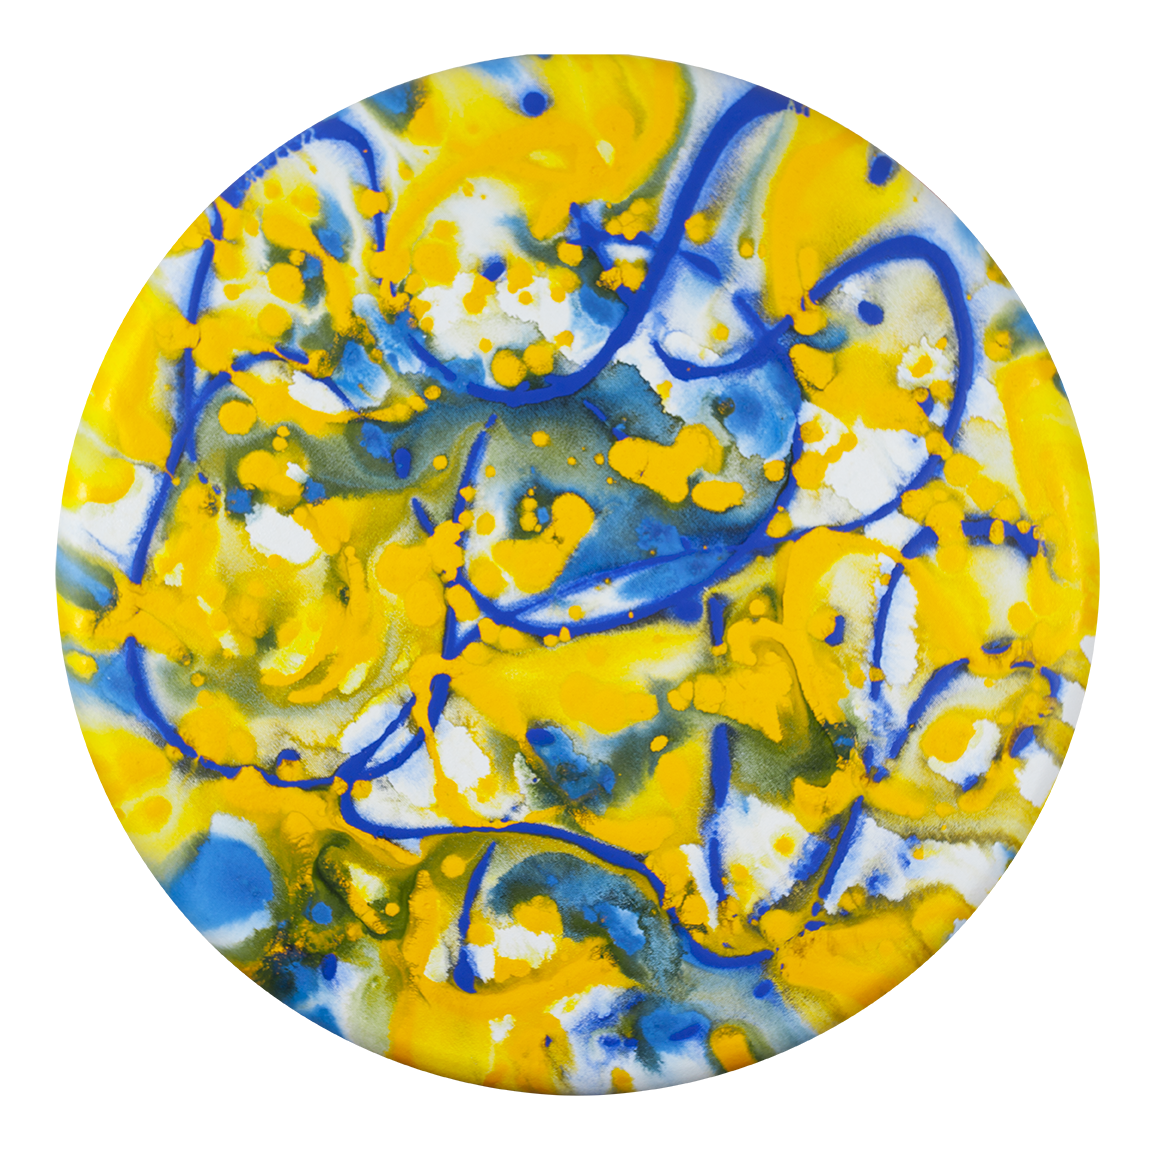 ©3/2022 Alicia R Peterson, *We Are One*. Acrylic on 24-inch diameter convex canvas. Photographer: Peter Scheer.